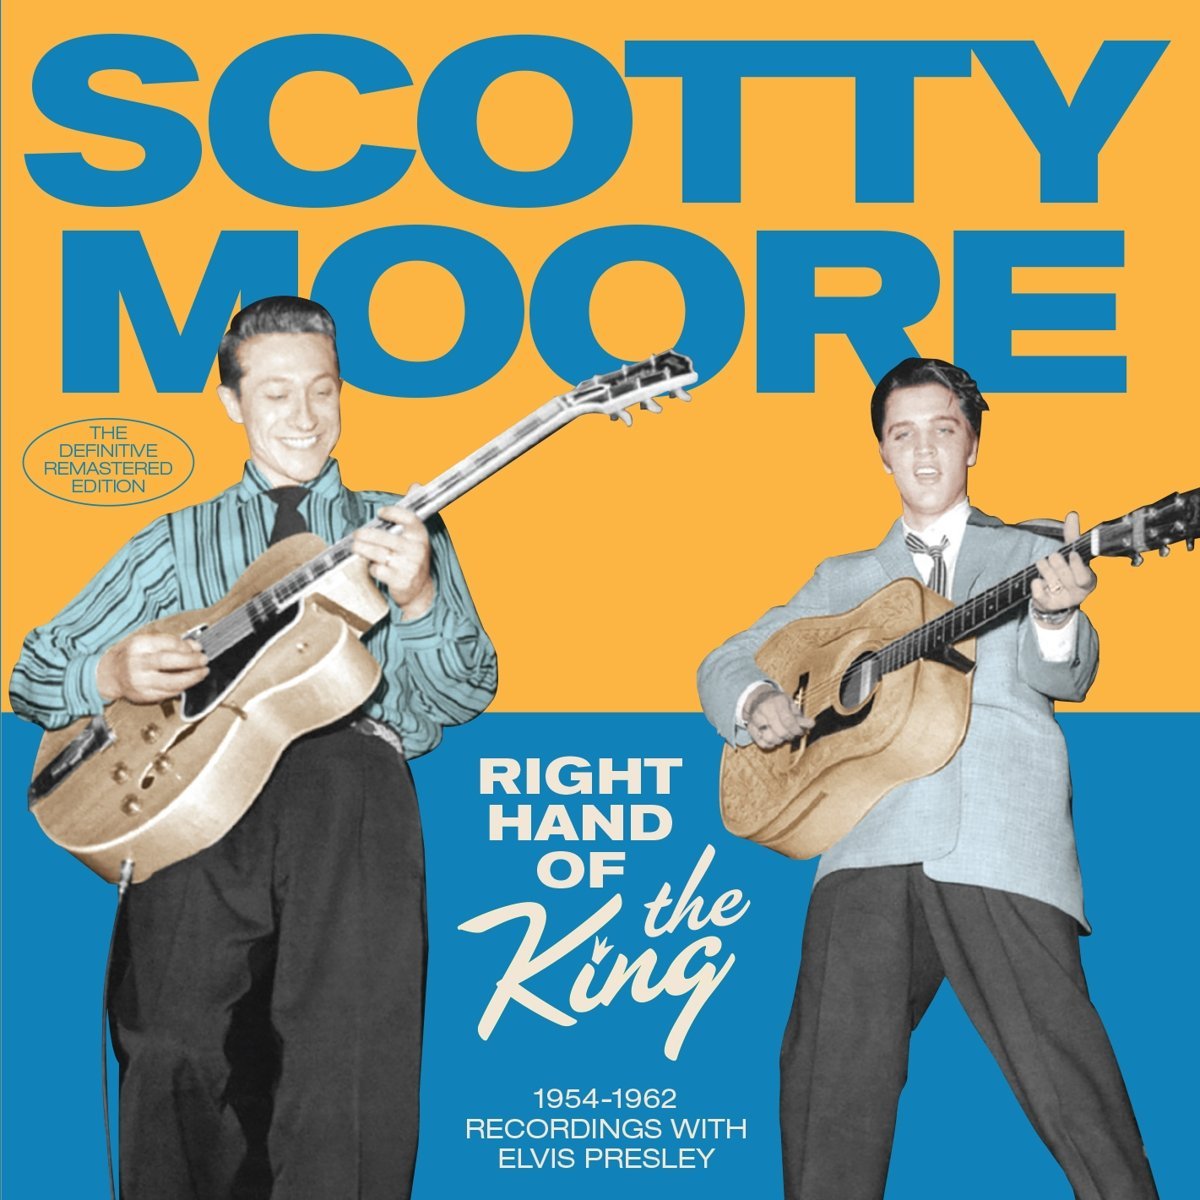 SCOTTY MOORE / スコッティ・ムーア / RIGHT HAND OF THE KING - 1954-62 RECORDINGS WITH ELVIS PRESLEY